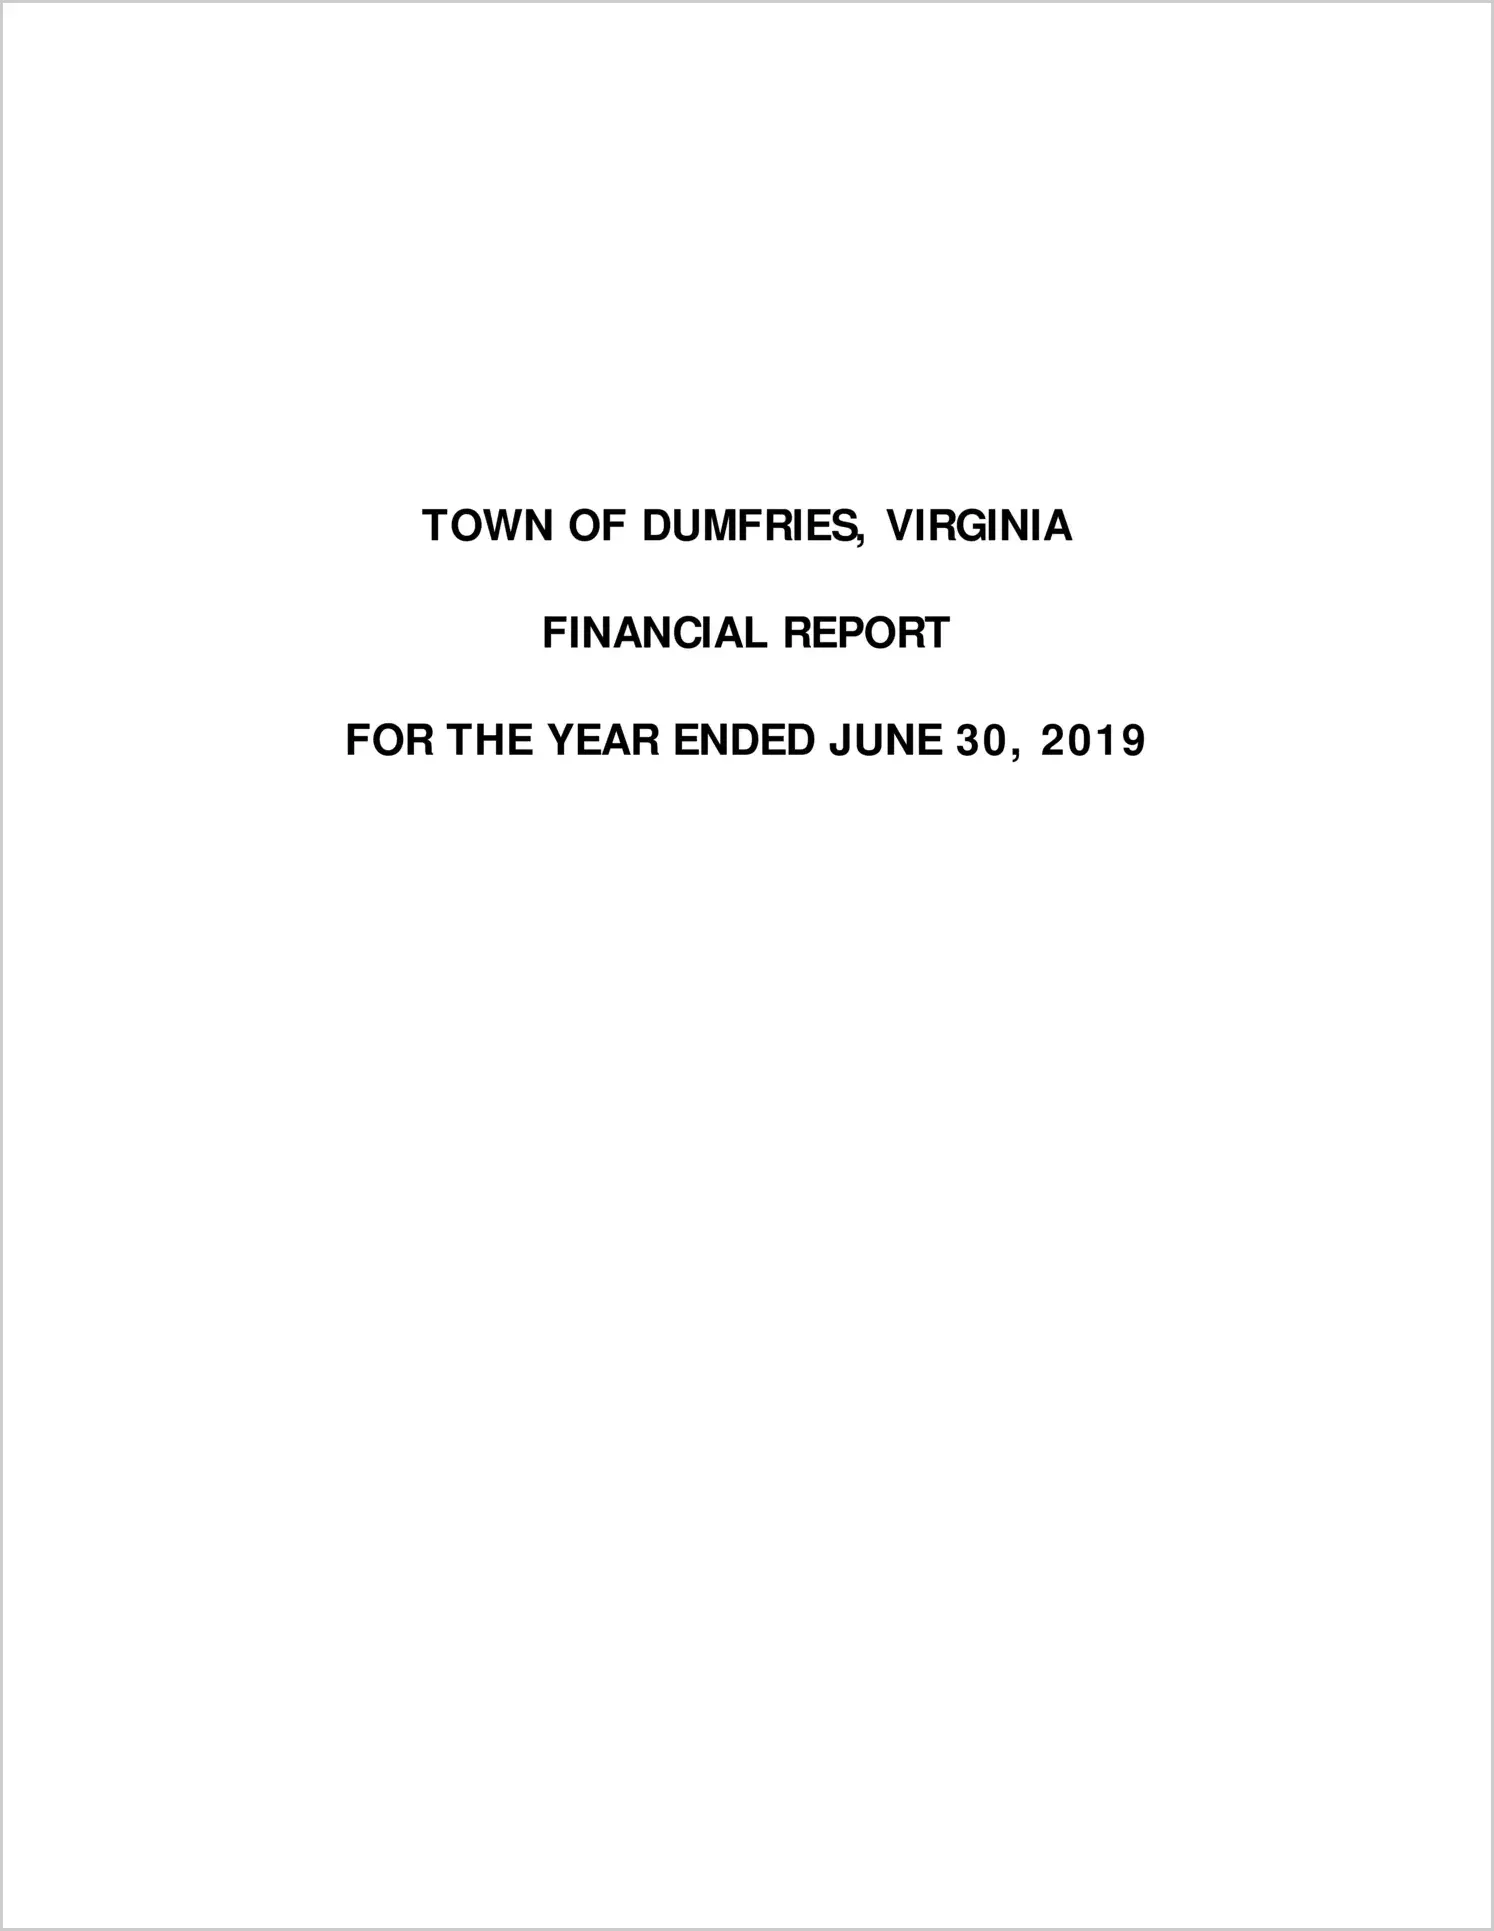 2019 Annual Financial Report for Town of Dumfries